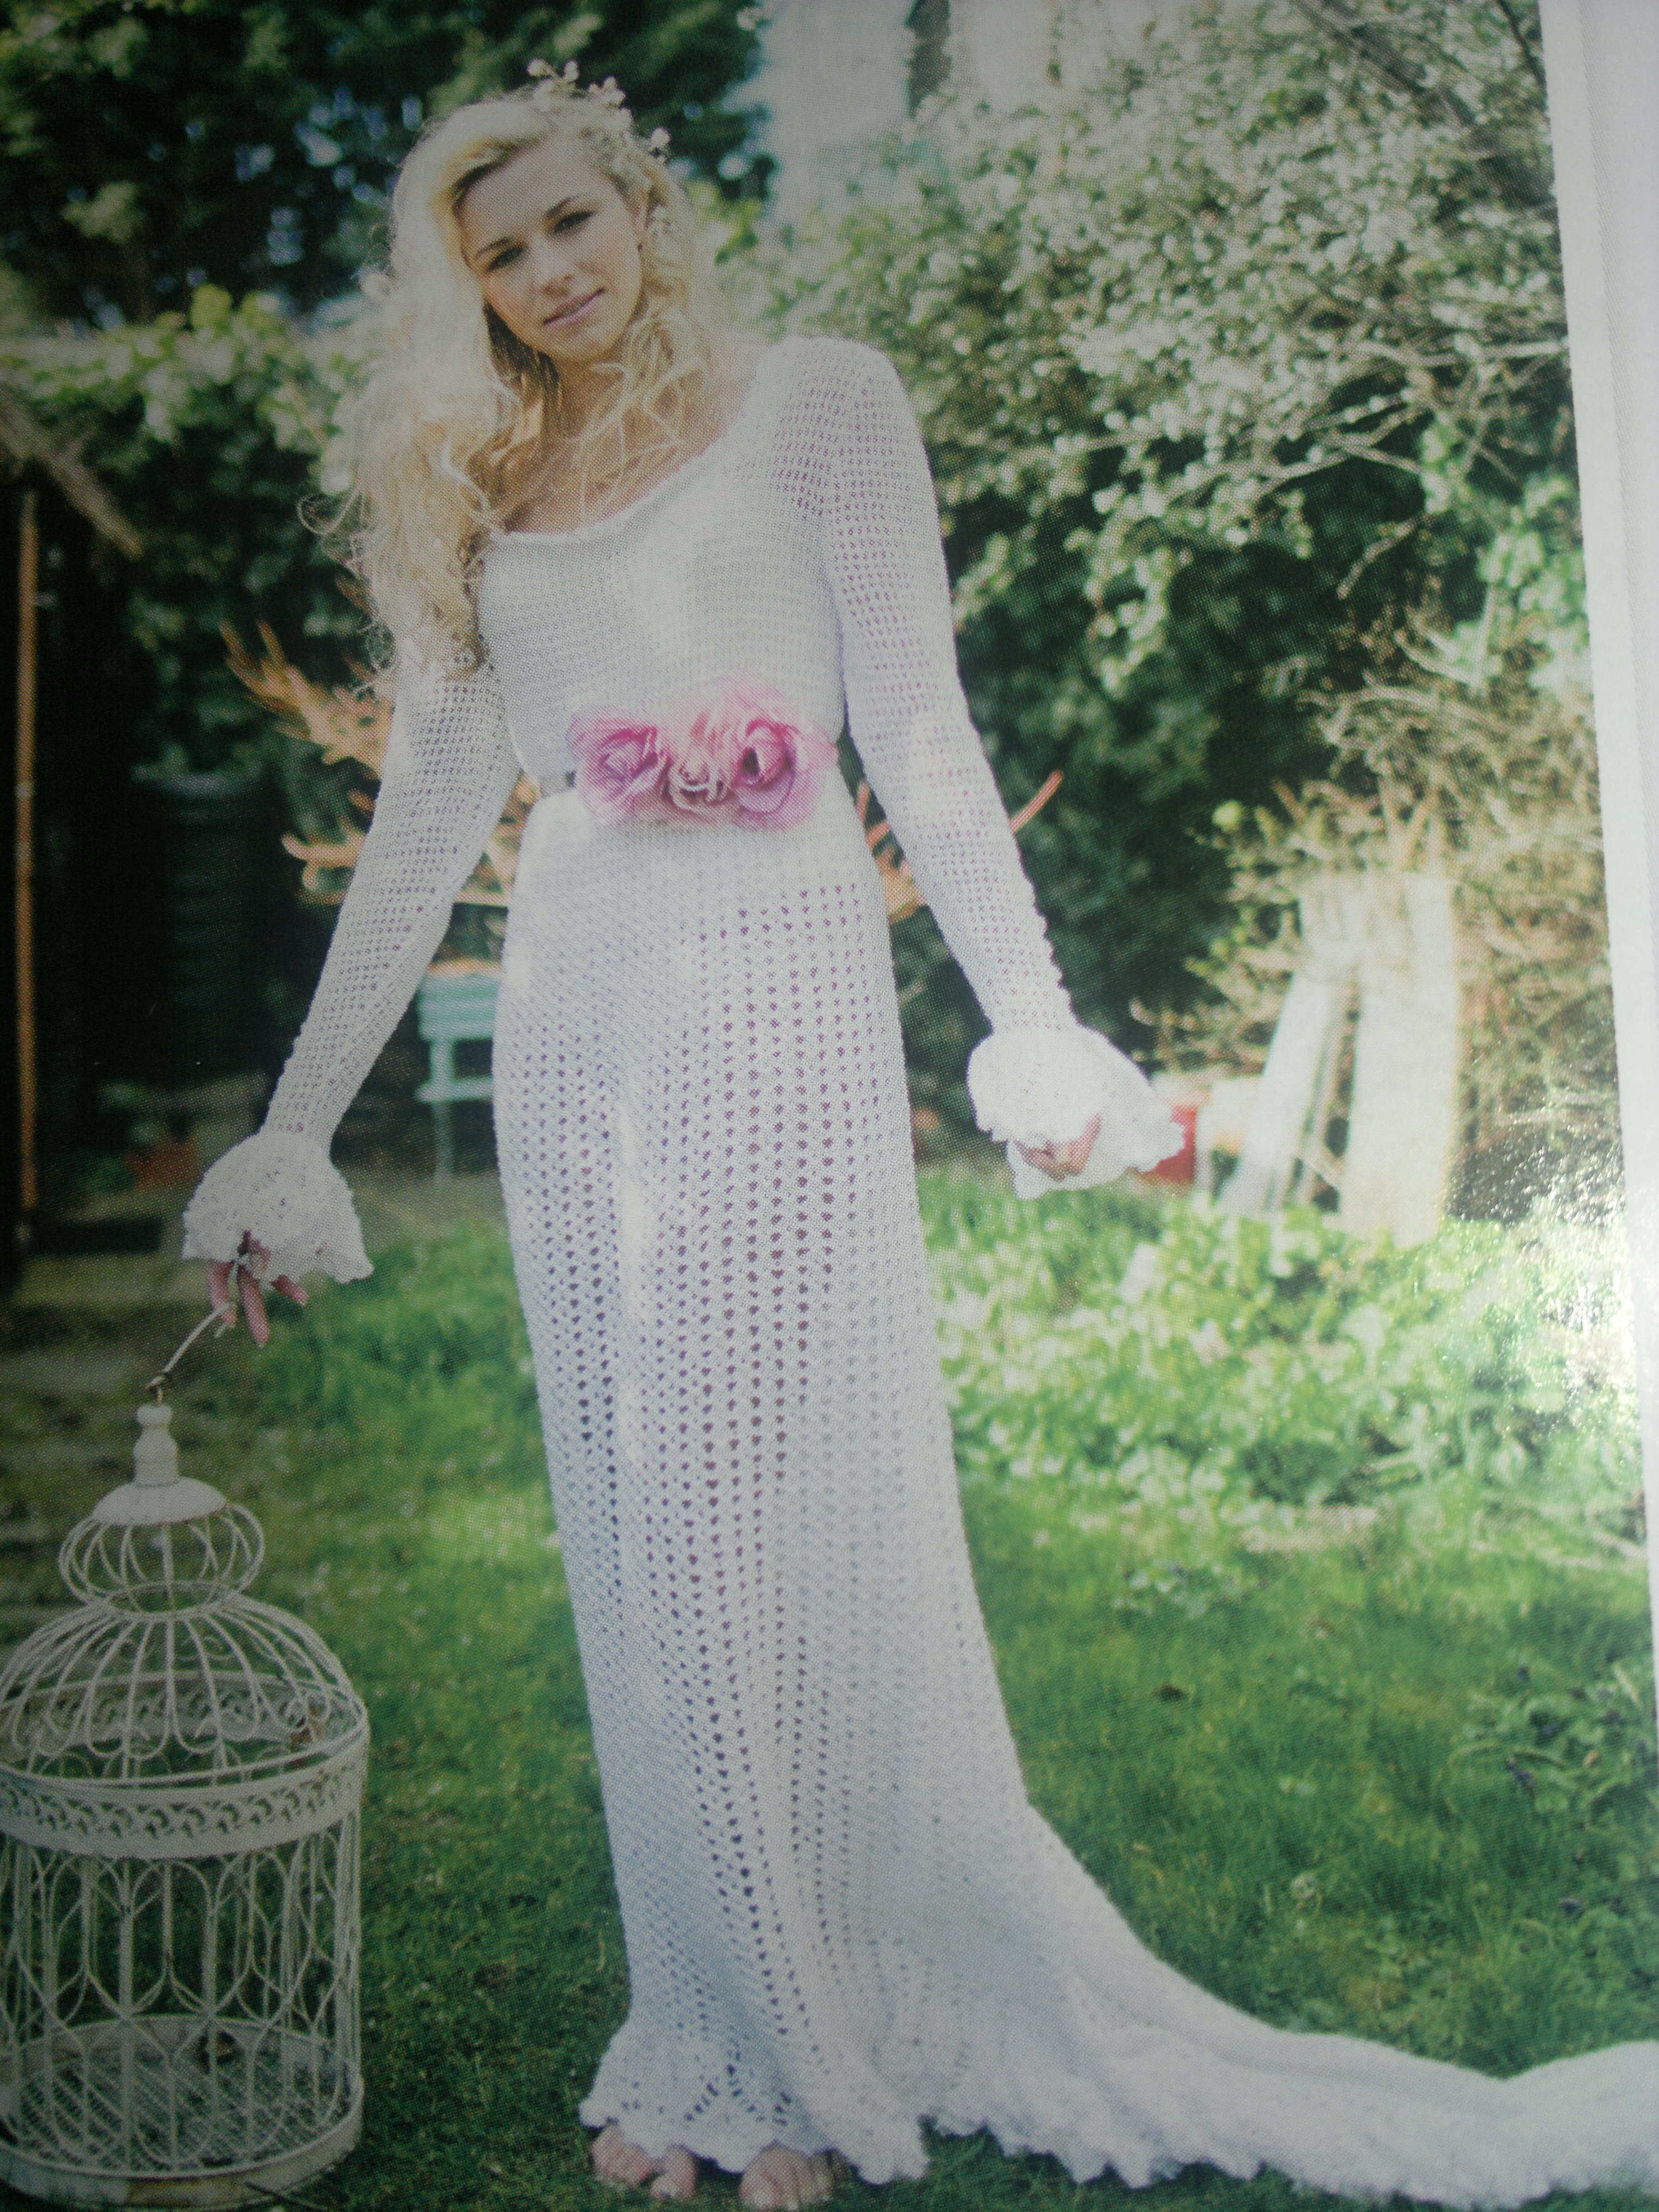 Crochet Wedding Dress Patterns Crochet Wedding Dresses Patterns Pictures Ideas Guide To Buying